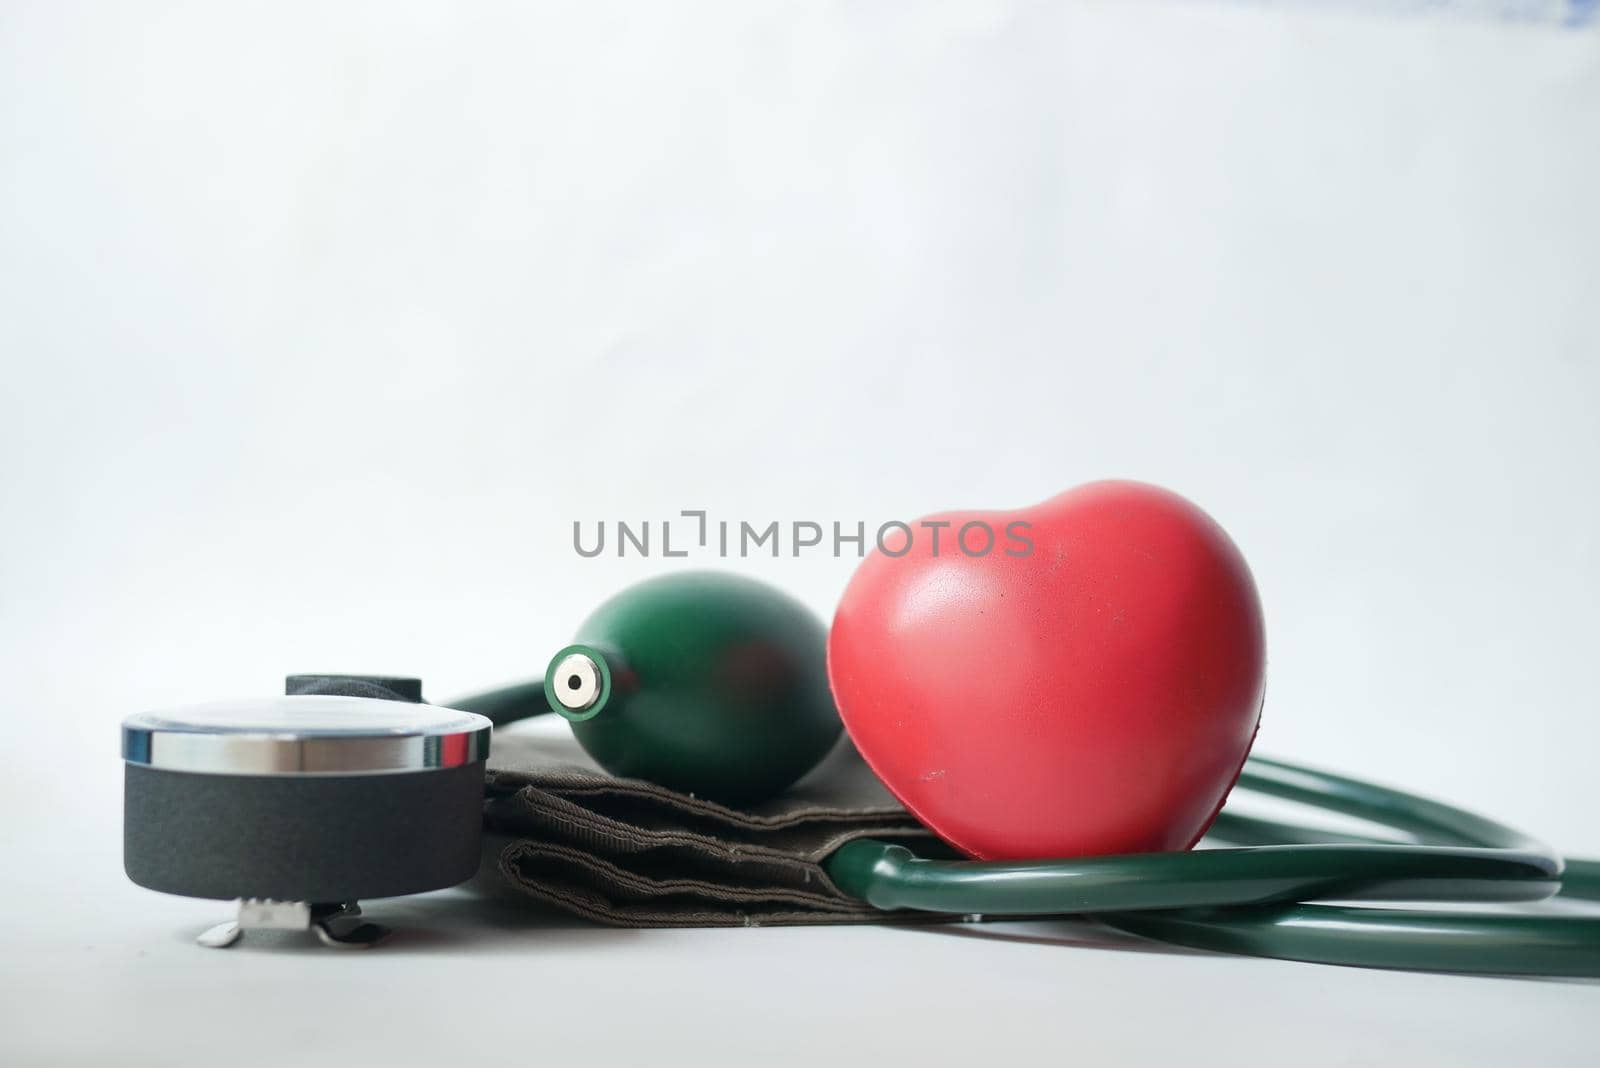 blood pressure machine and heart shape on white background by towfiq007